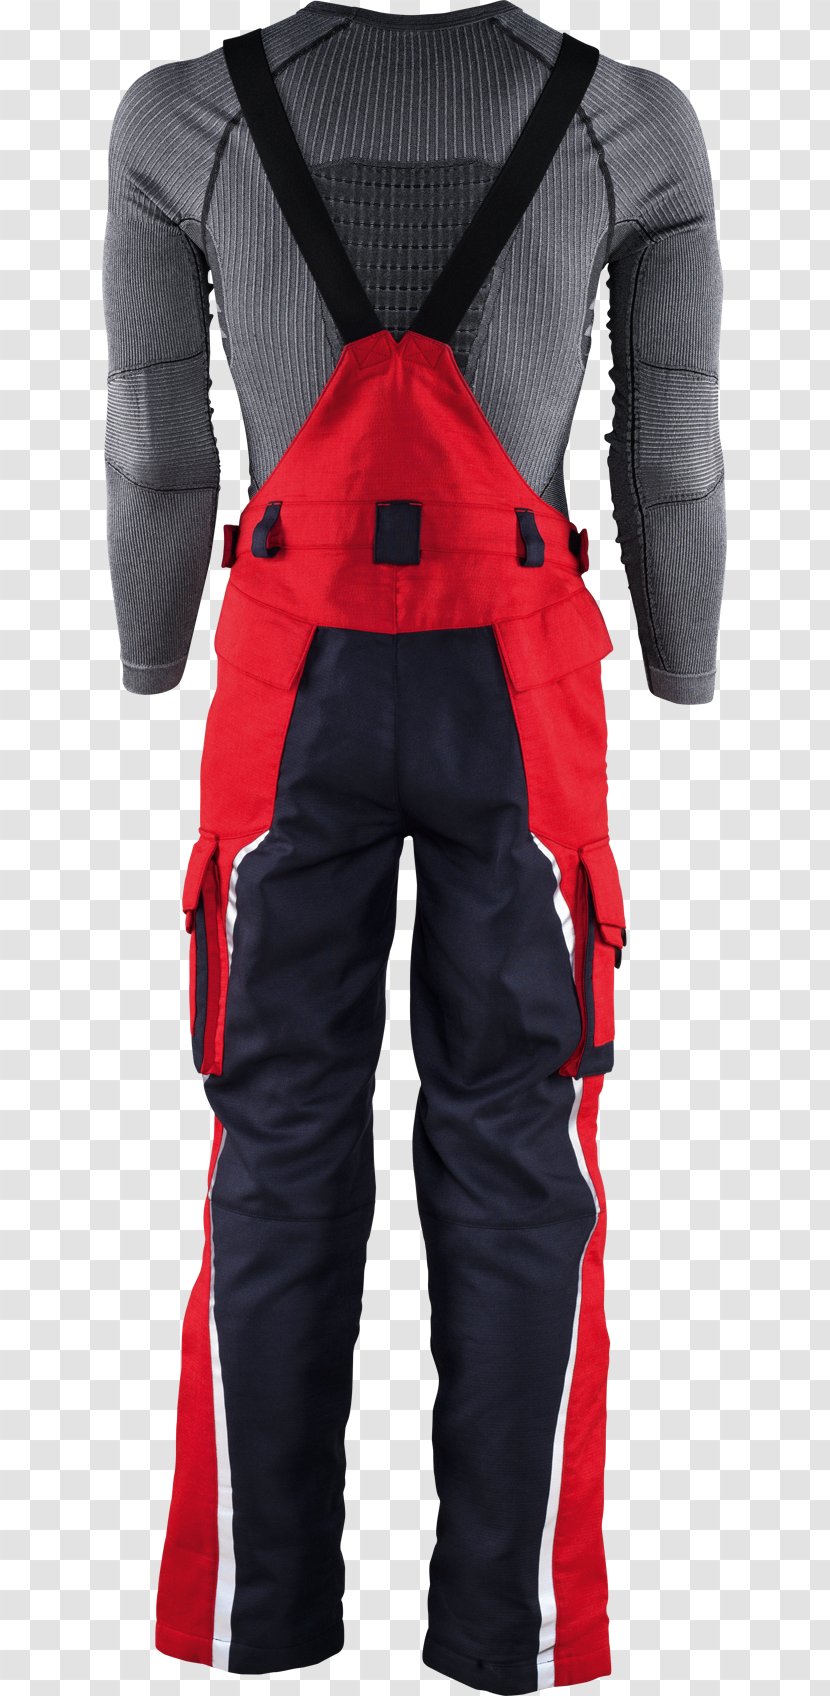 Dry Suit Hockey Protective Pants & Ski Shorts - Red - Flash Material Transparent PNG